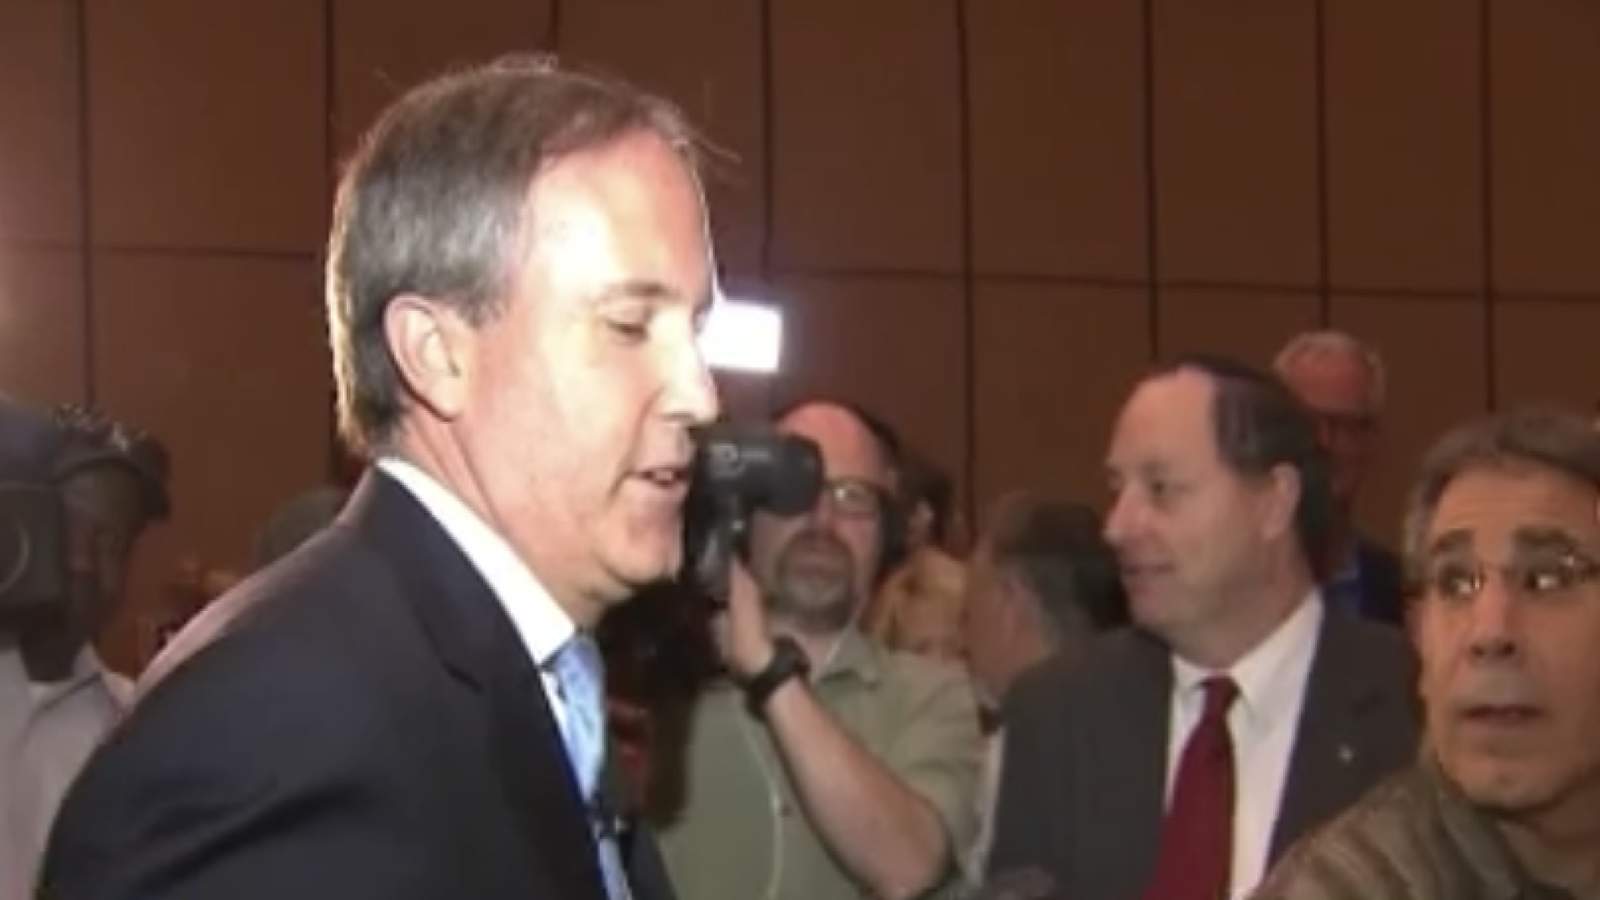 Paxton’s election fraud lawsuit is a non-starter but smart politics, legal experts say